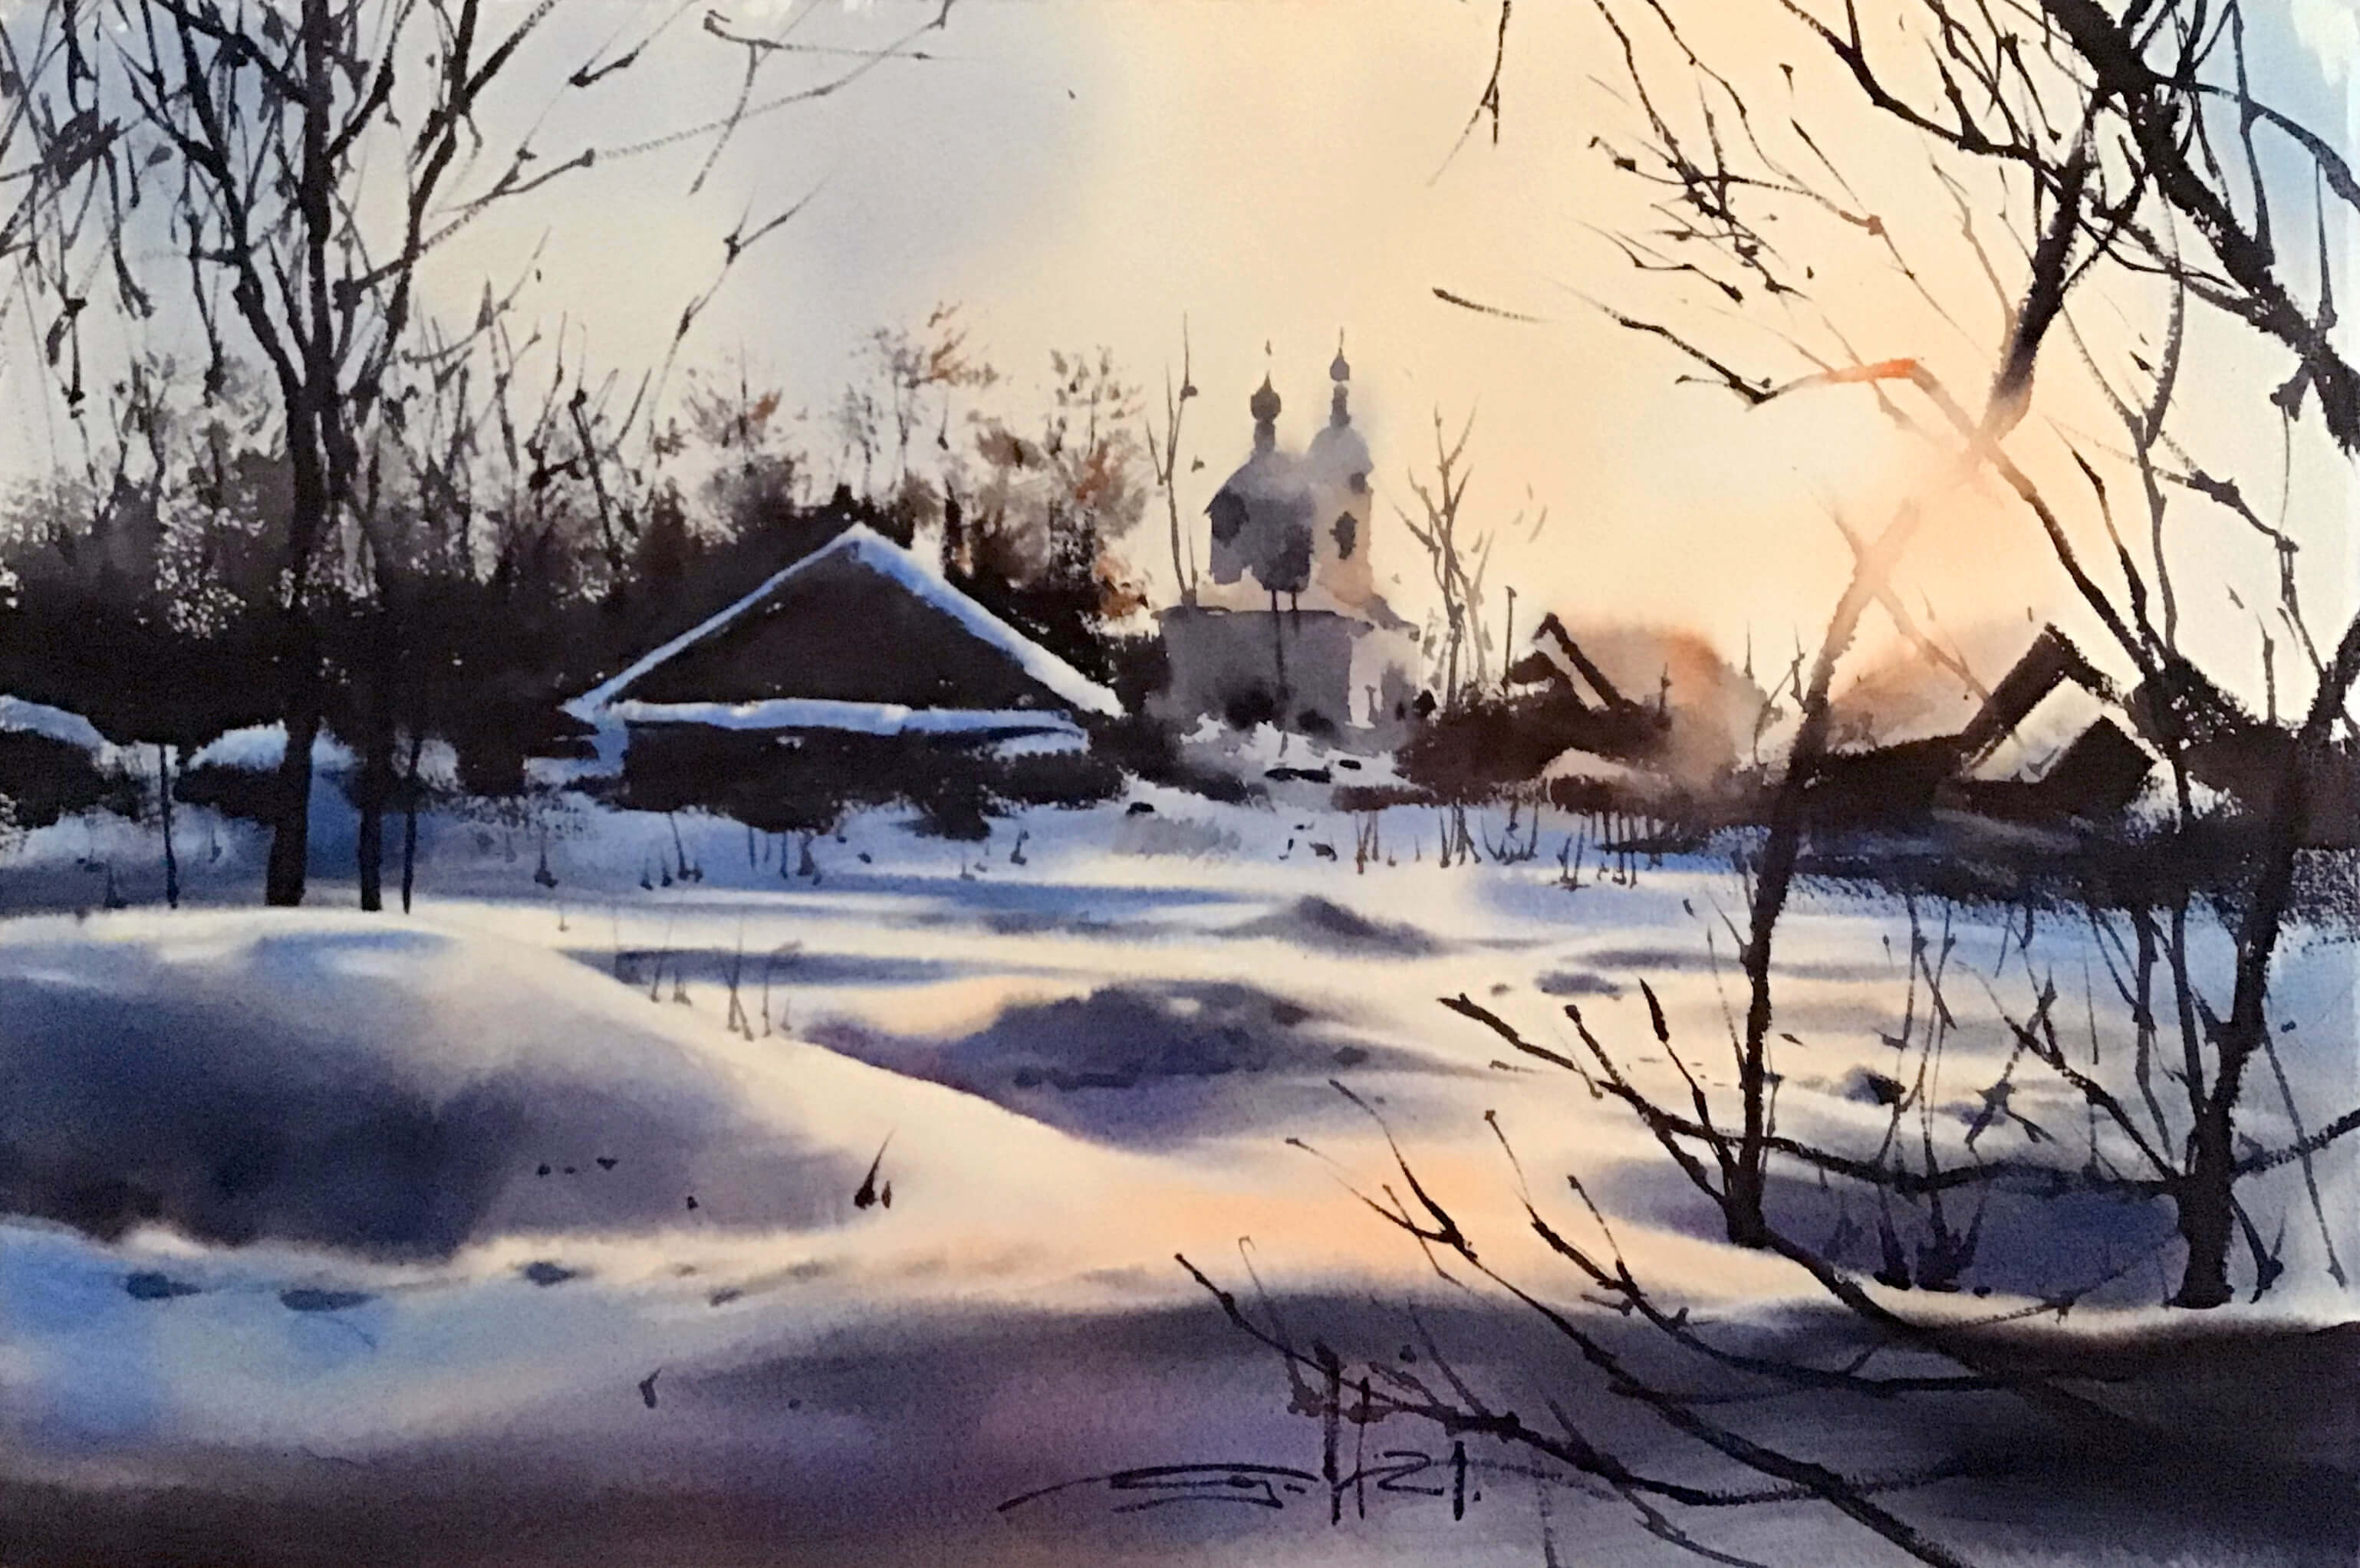 Winter landscape painting by Micheal Solovyev painting holidays France.